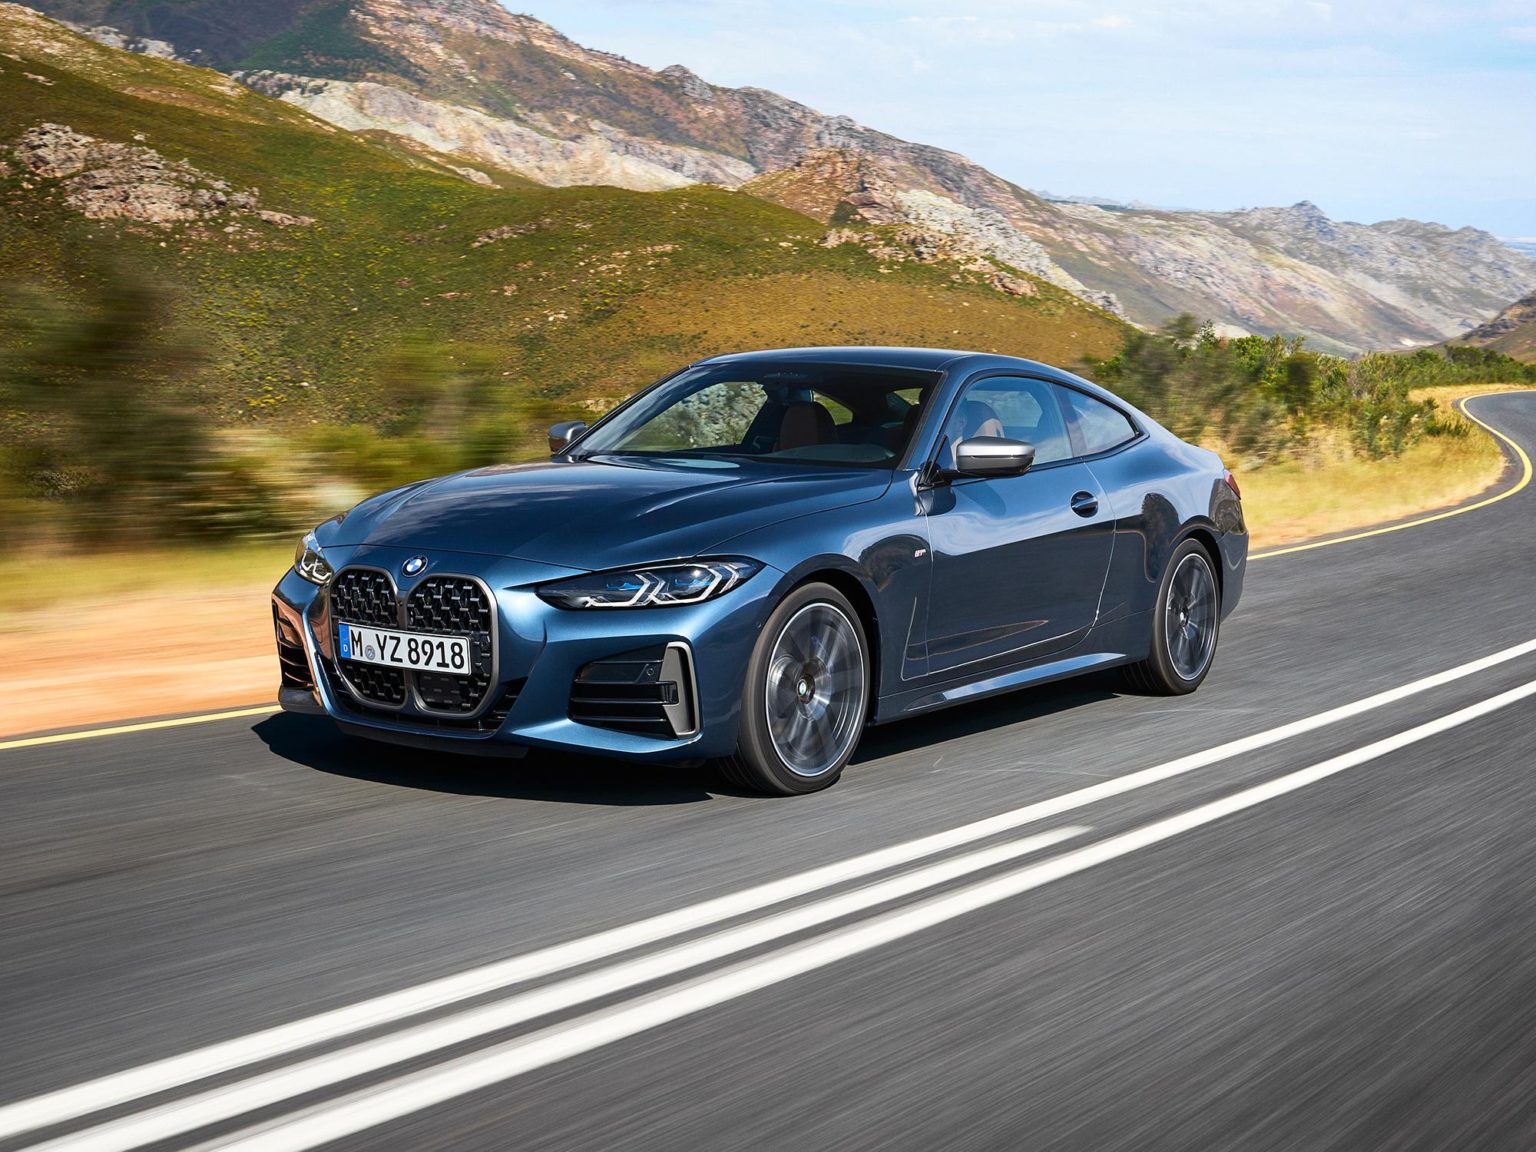 The 2021 BMW 4 Series has the drive dynamics BMW enthusiasts will love.